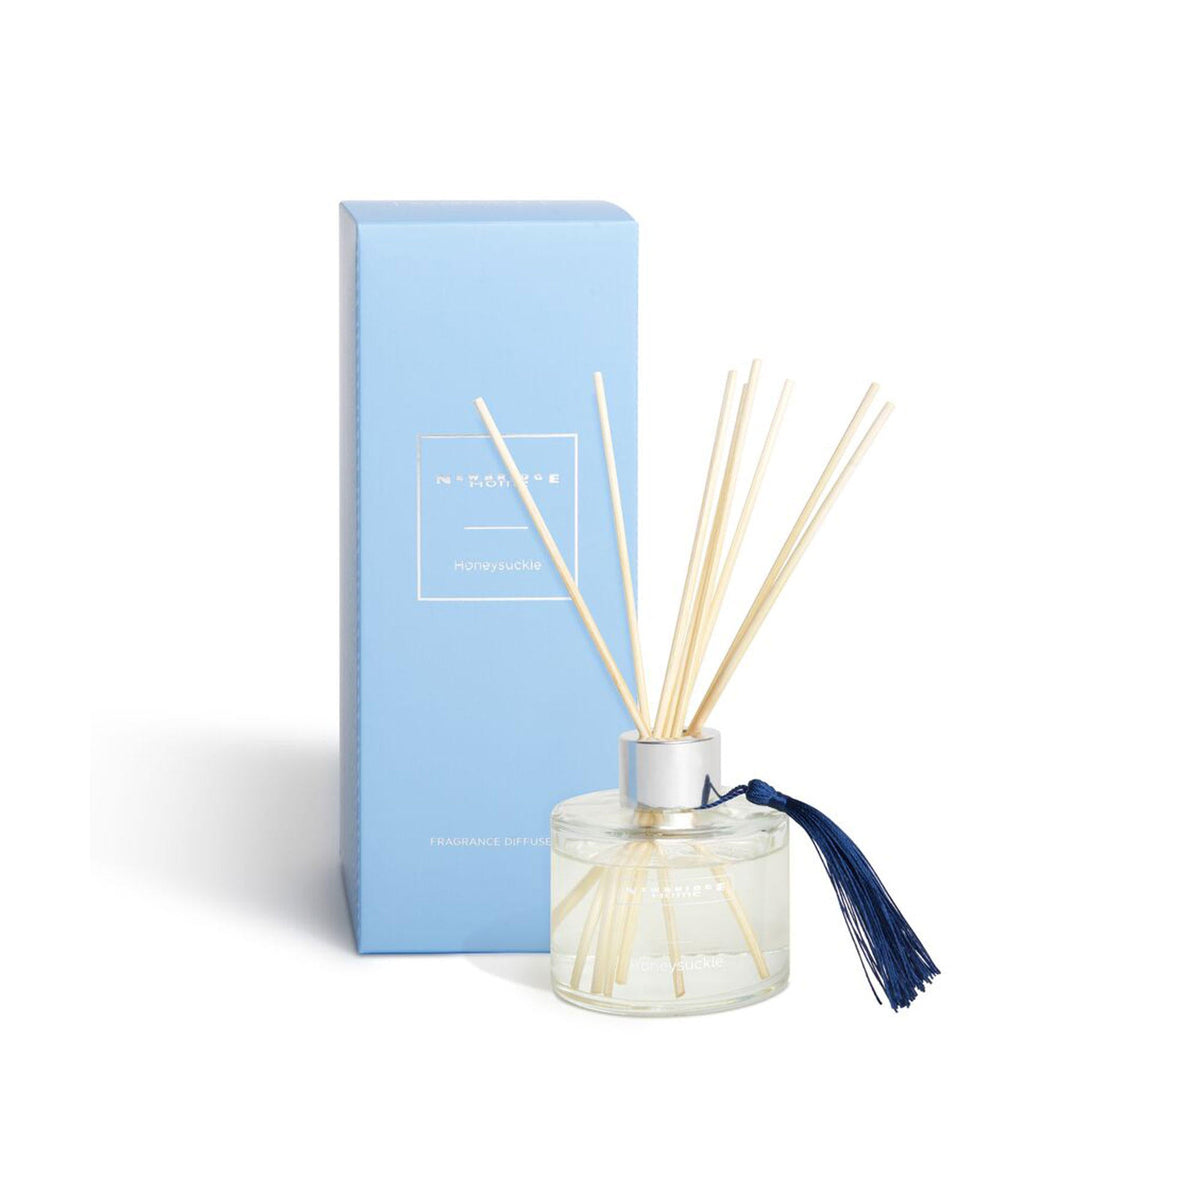 From Paris with Love Gift Set with Diffuser